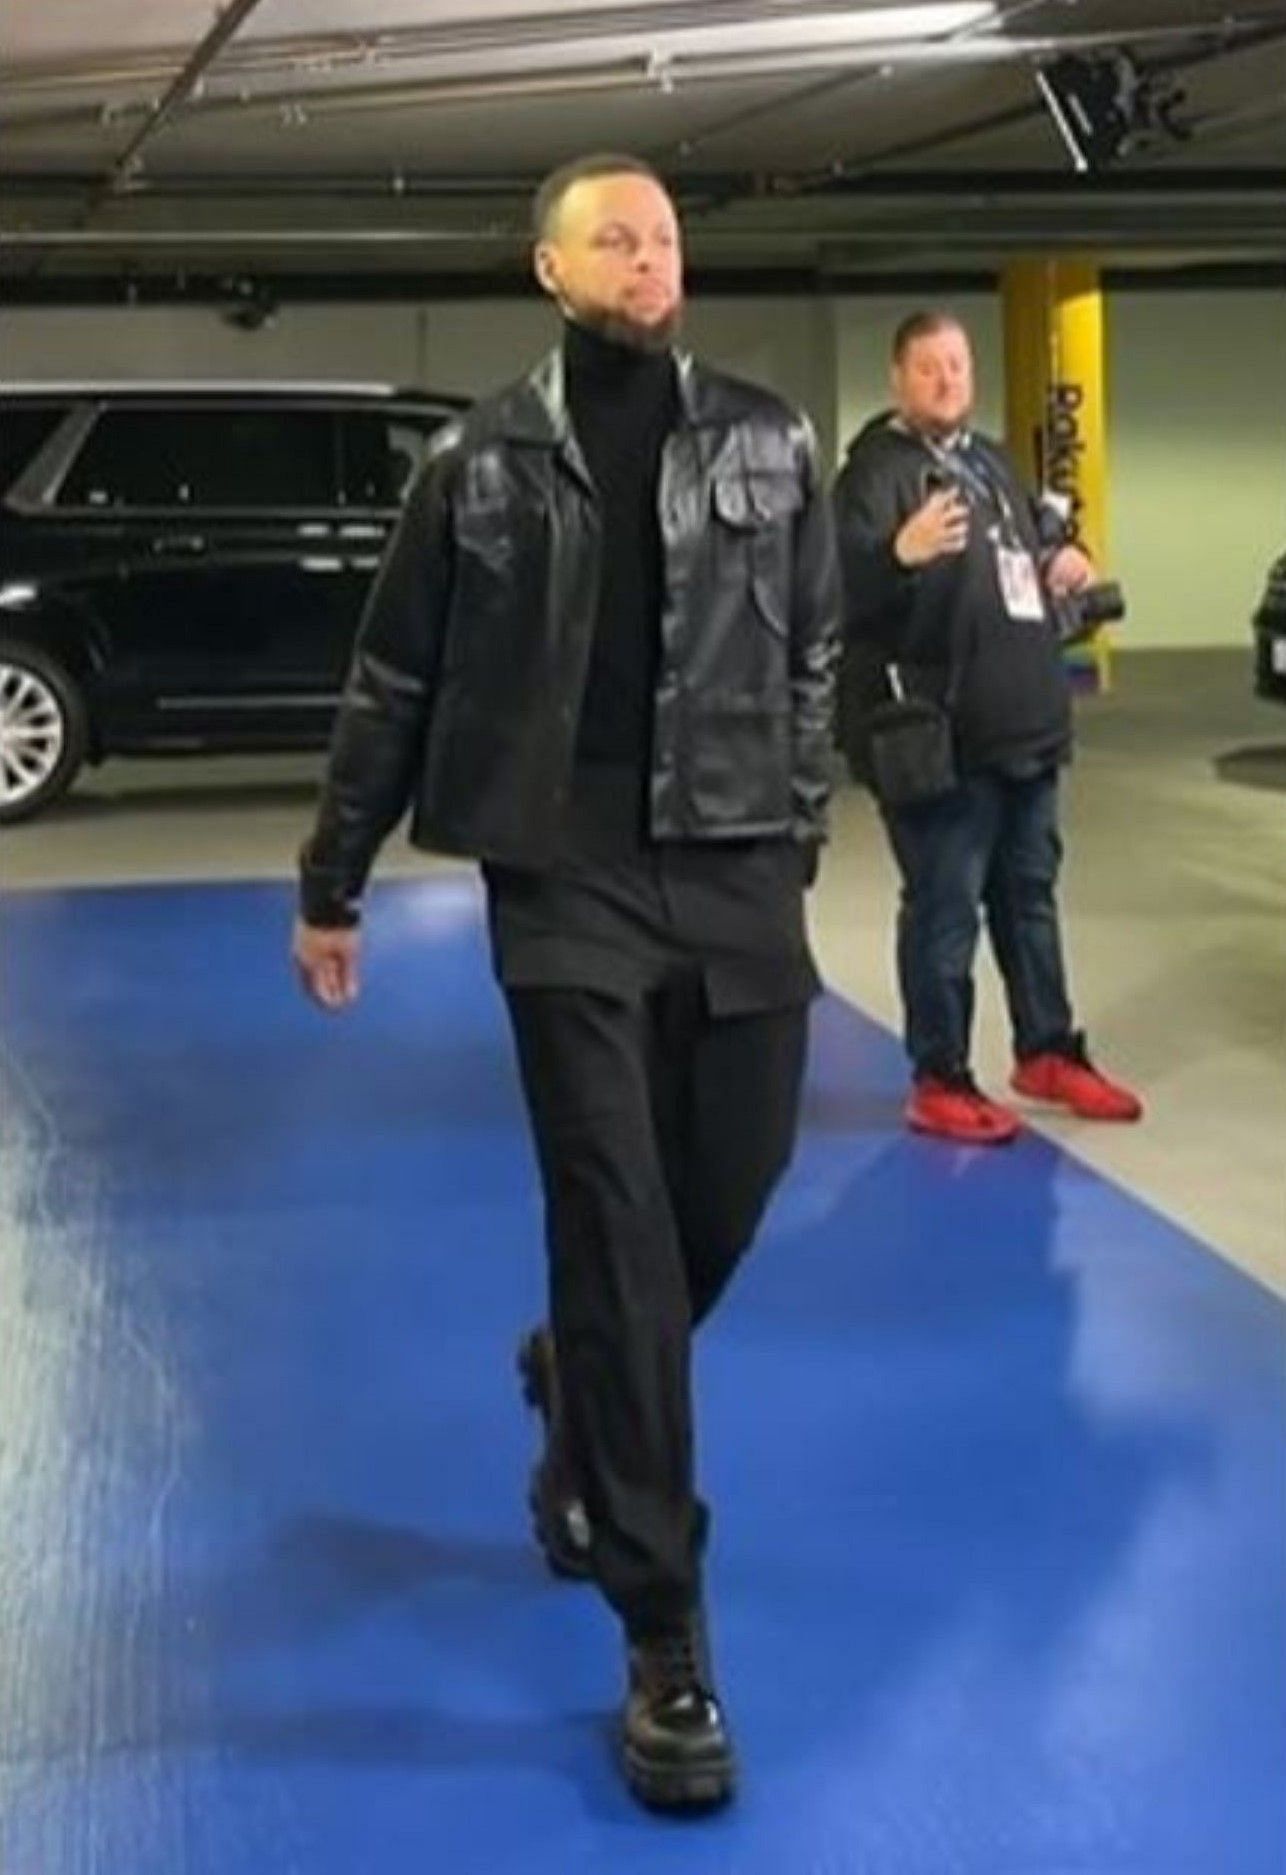 Steph Curry was in an all-black outfit when he arrived for their game against the Dallas Mavericks on Tuesday.